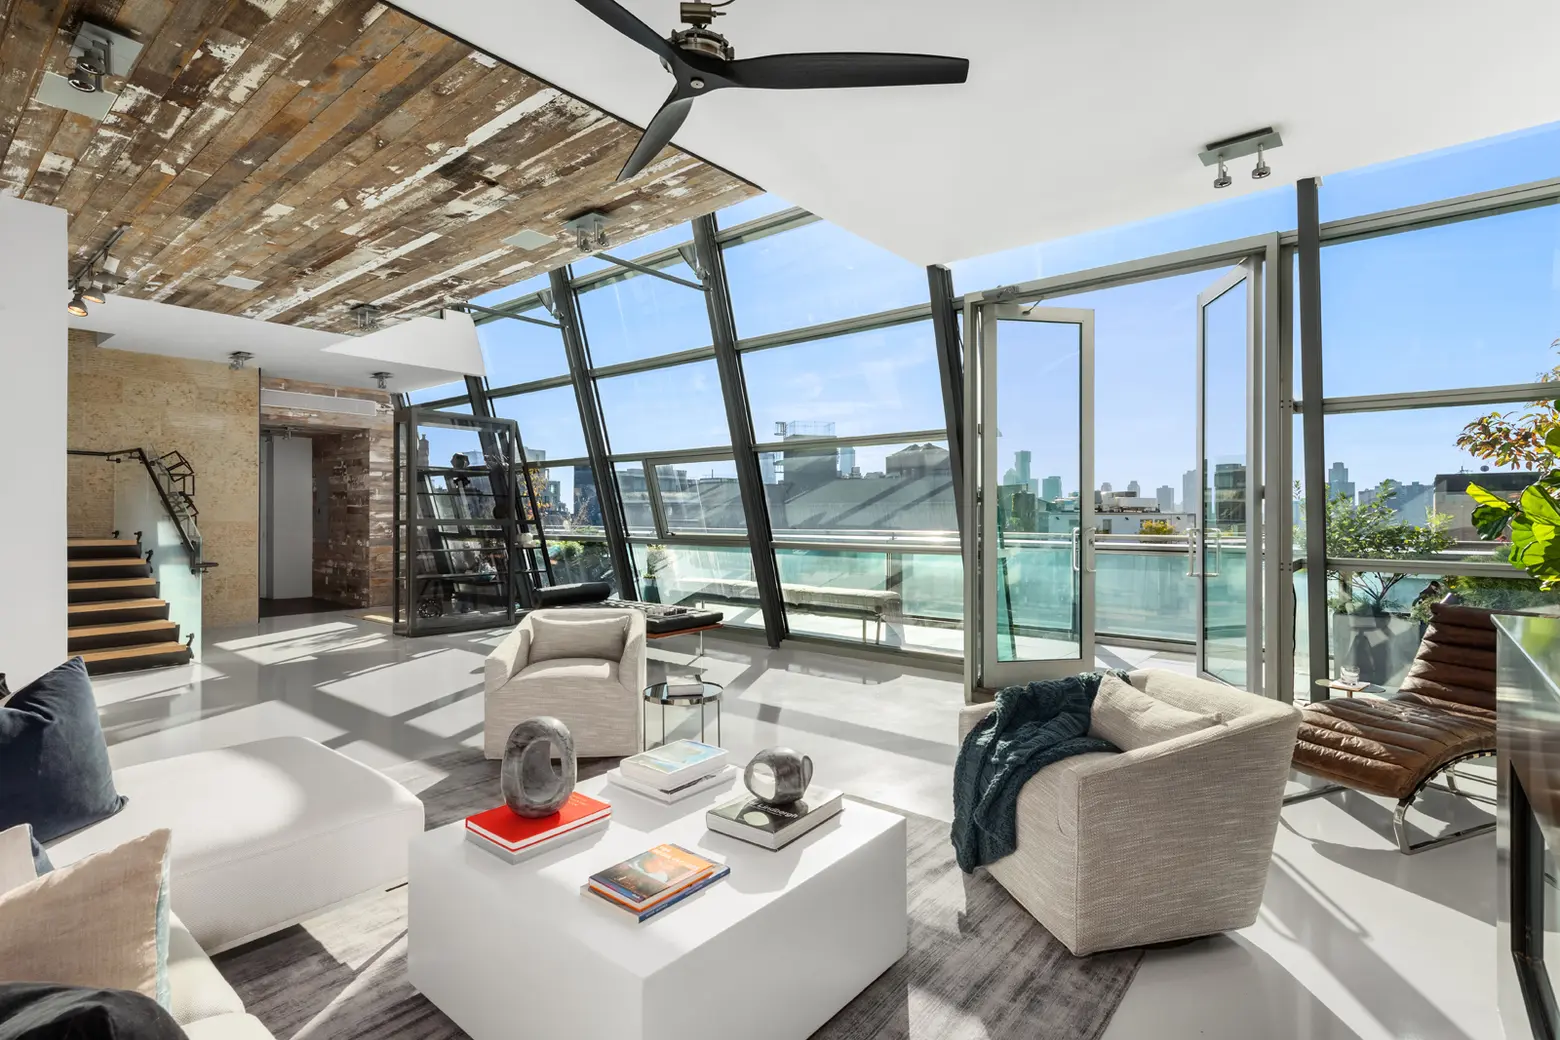 $10M Hudson Square penthouse has 1,650 square feet of terraces overlooking the river